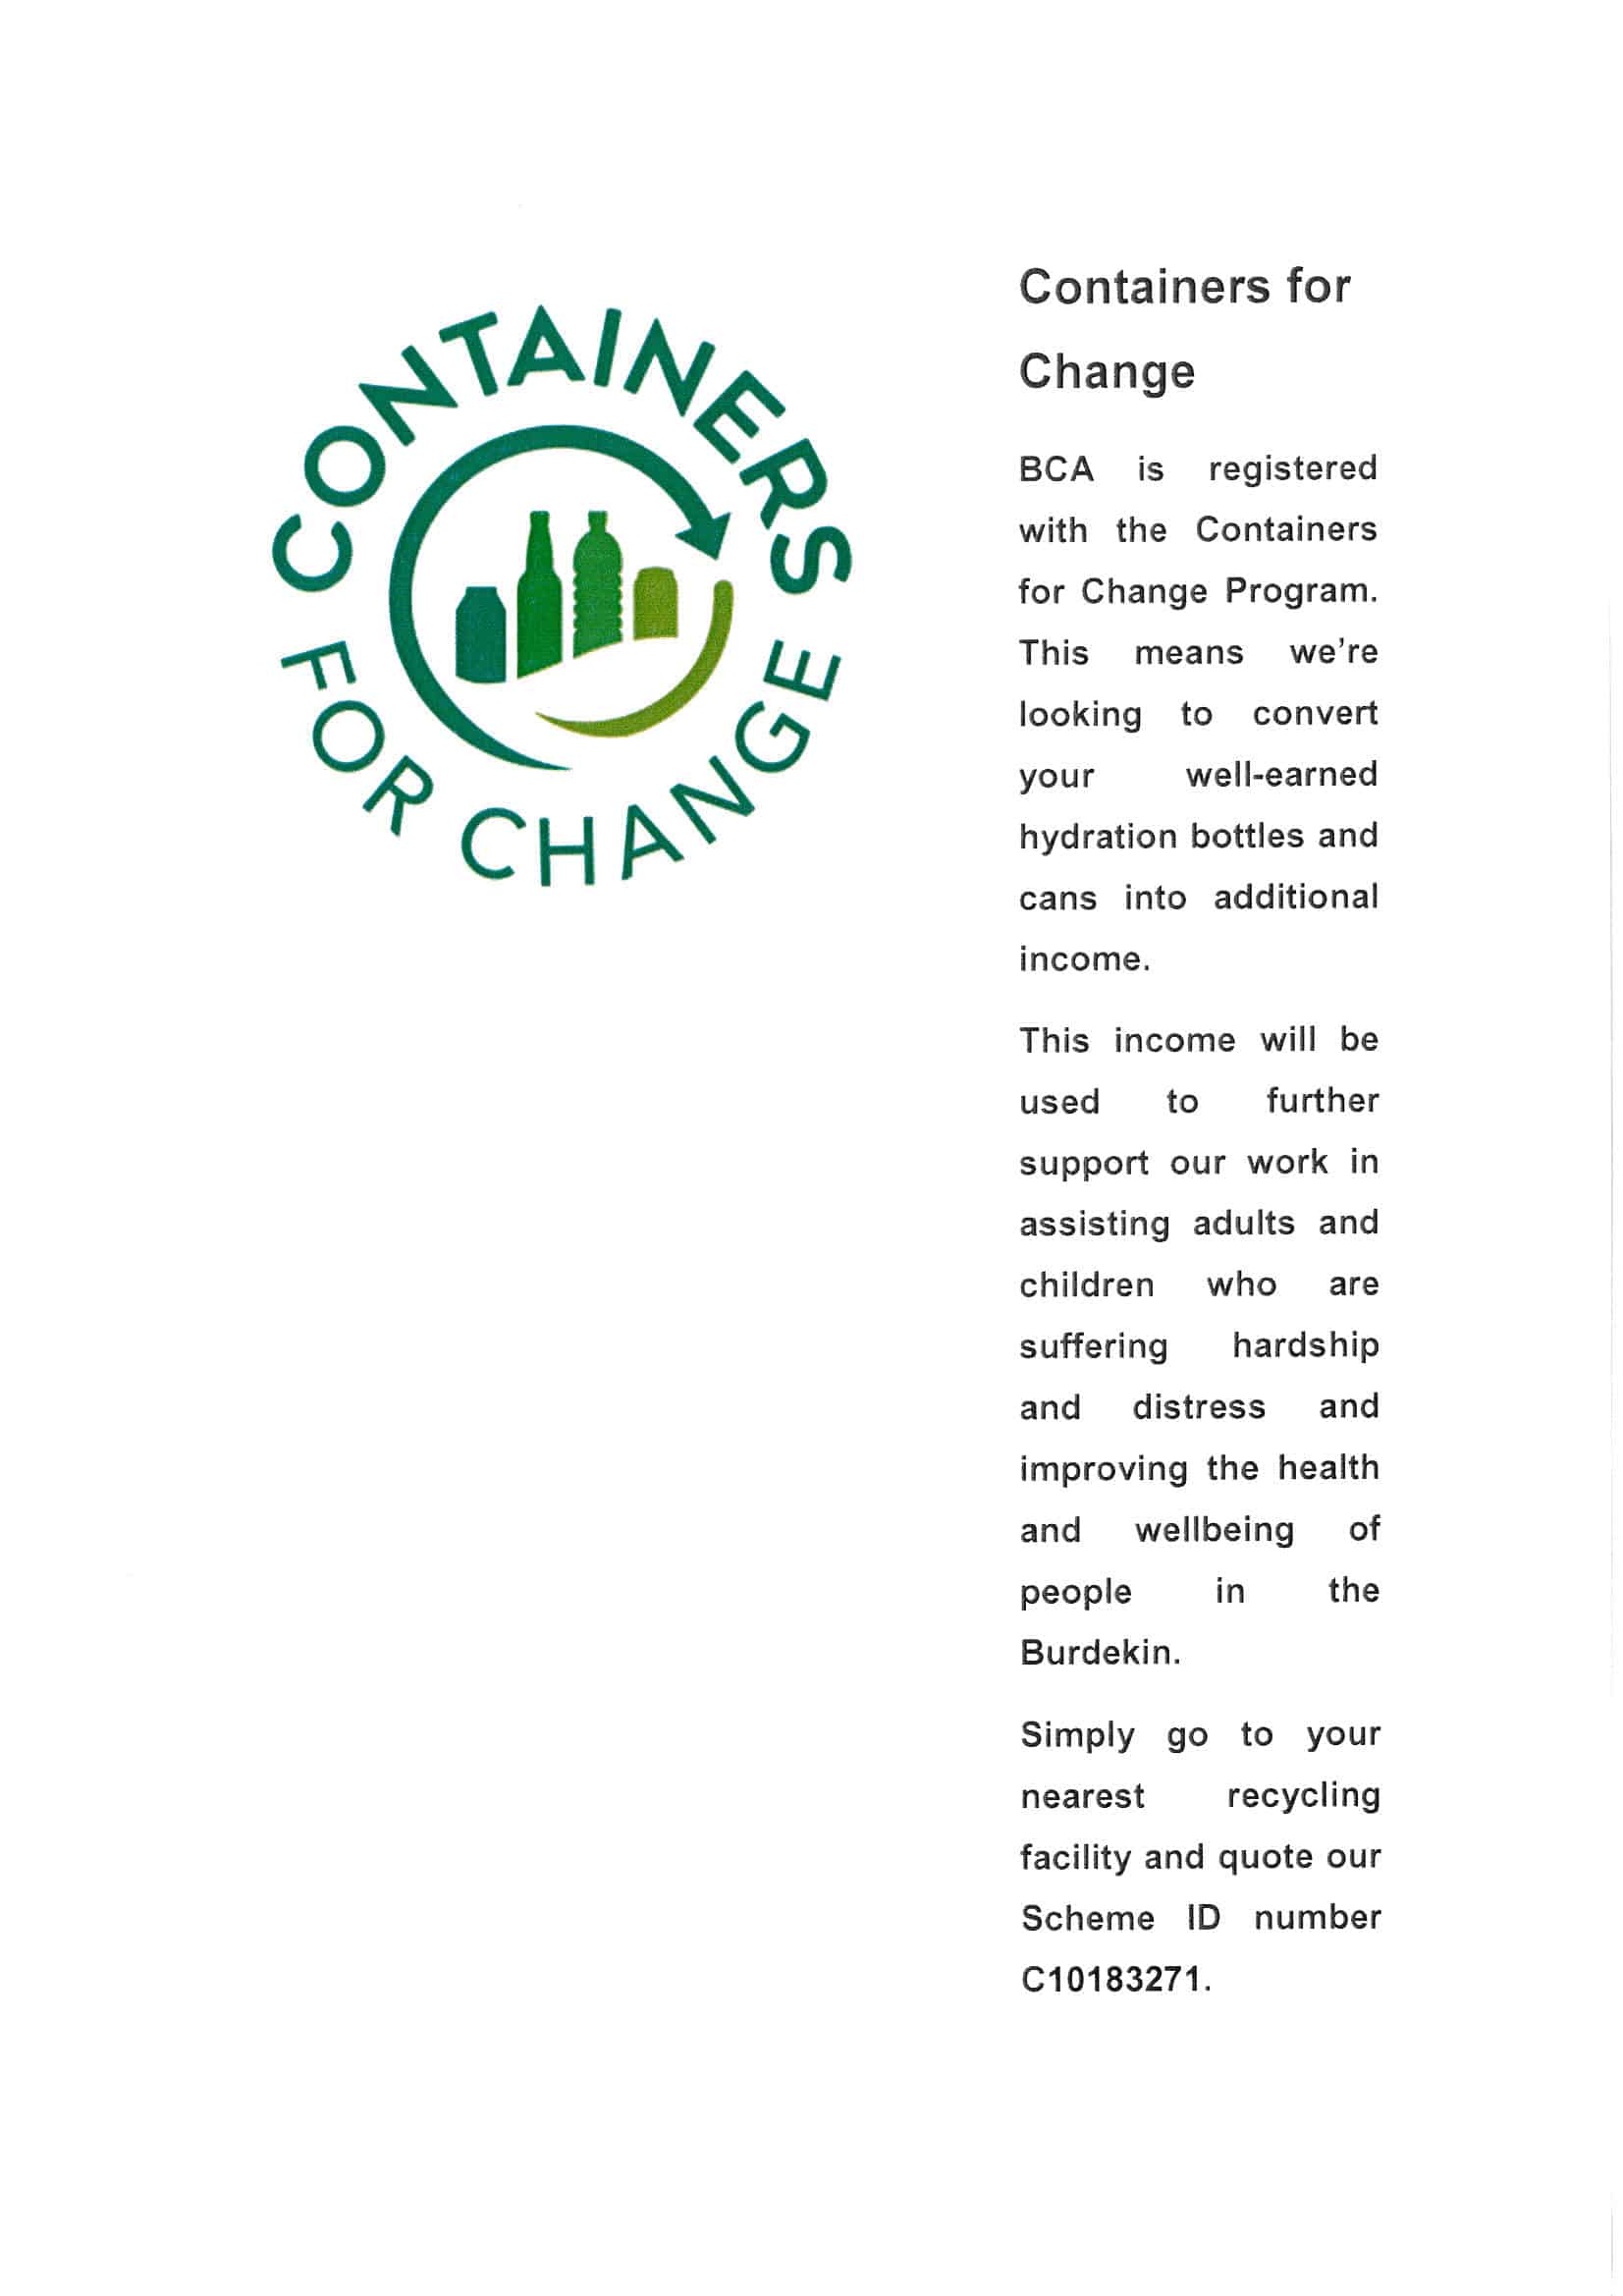 Containers for change - Scheme ID C10183271